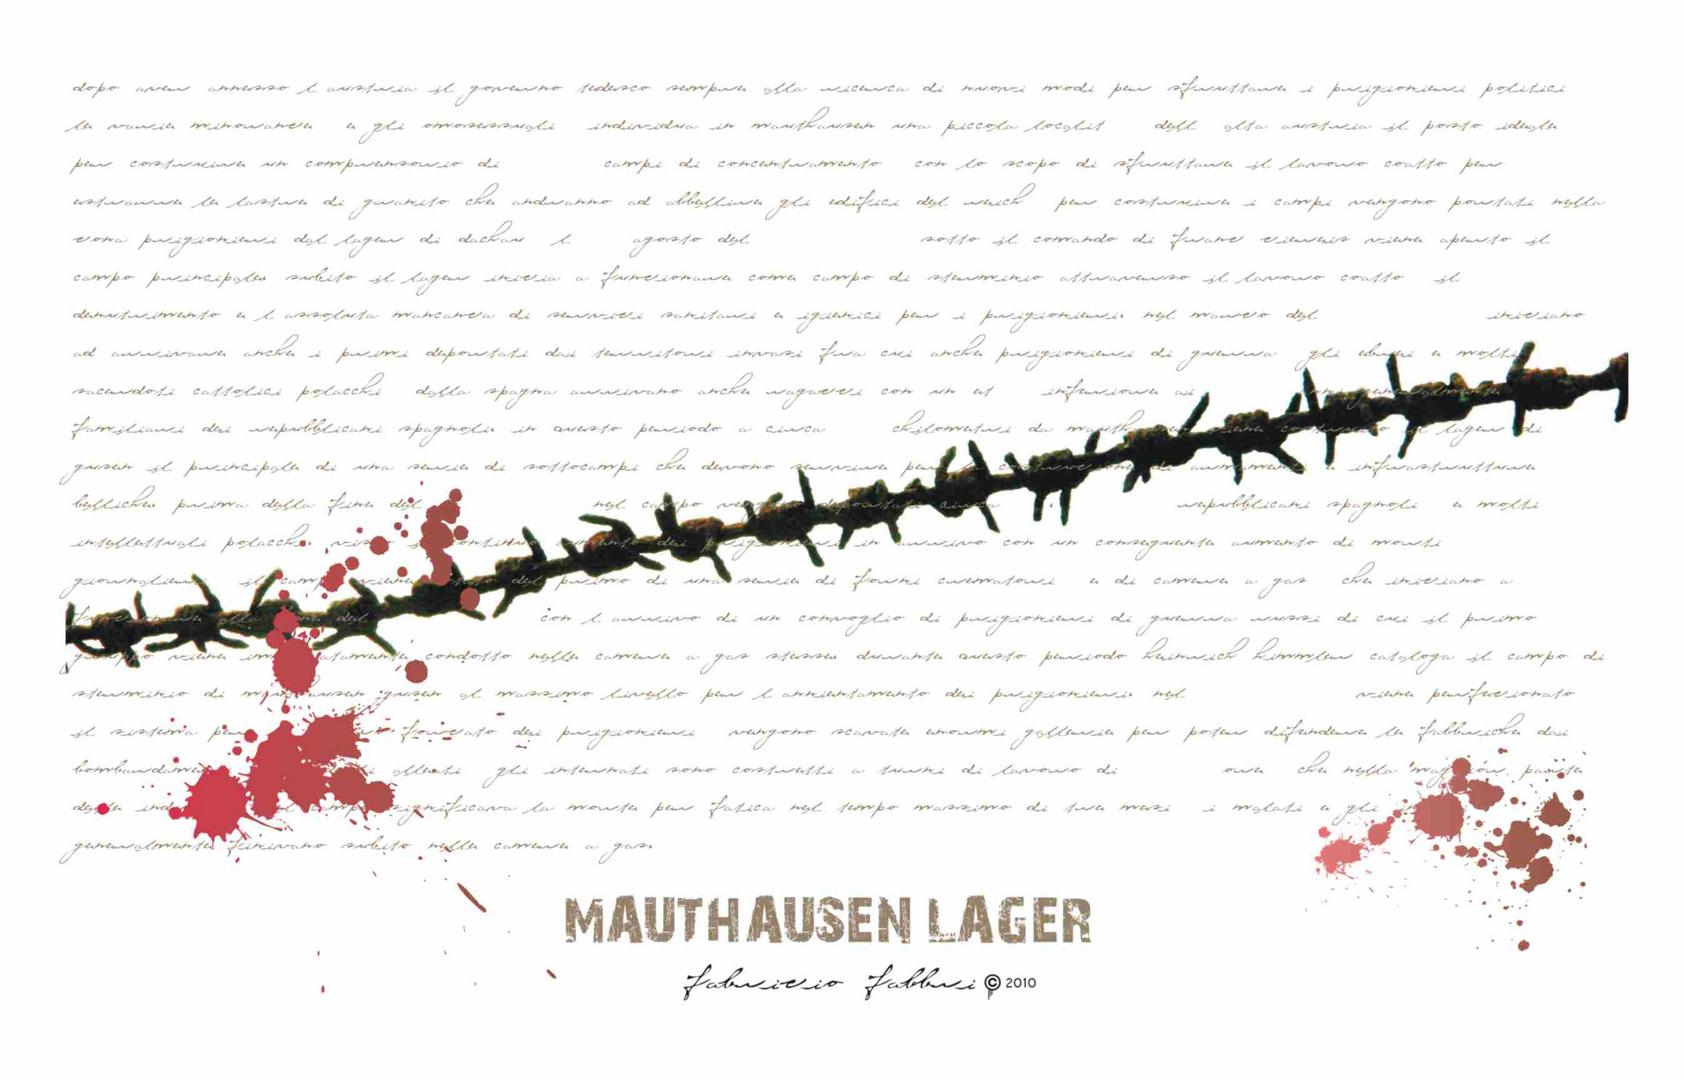 Mauthausen Lager